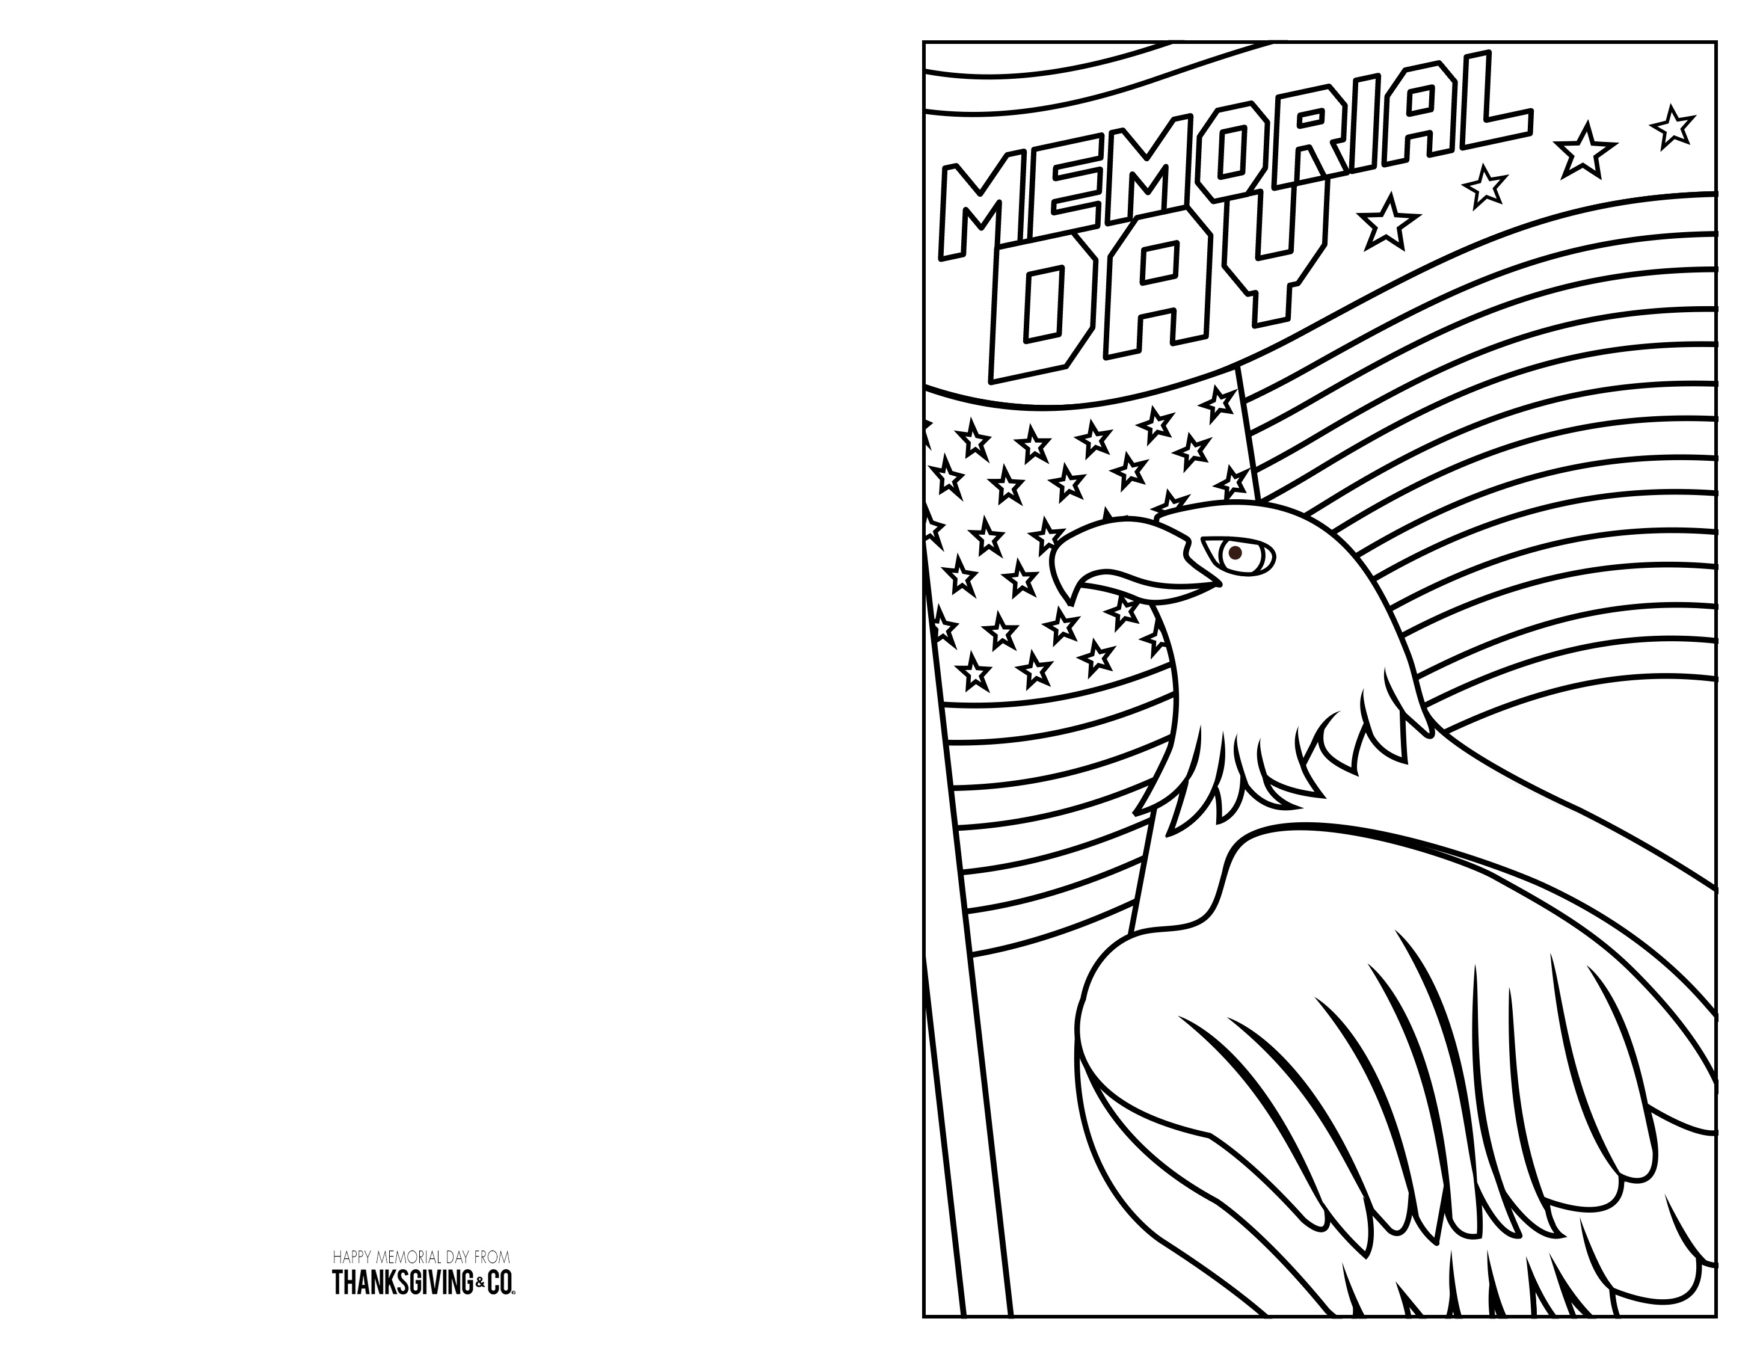 Free Memorial Day Coloring Pages Cards You Can Print At Home